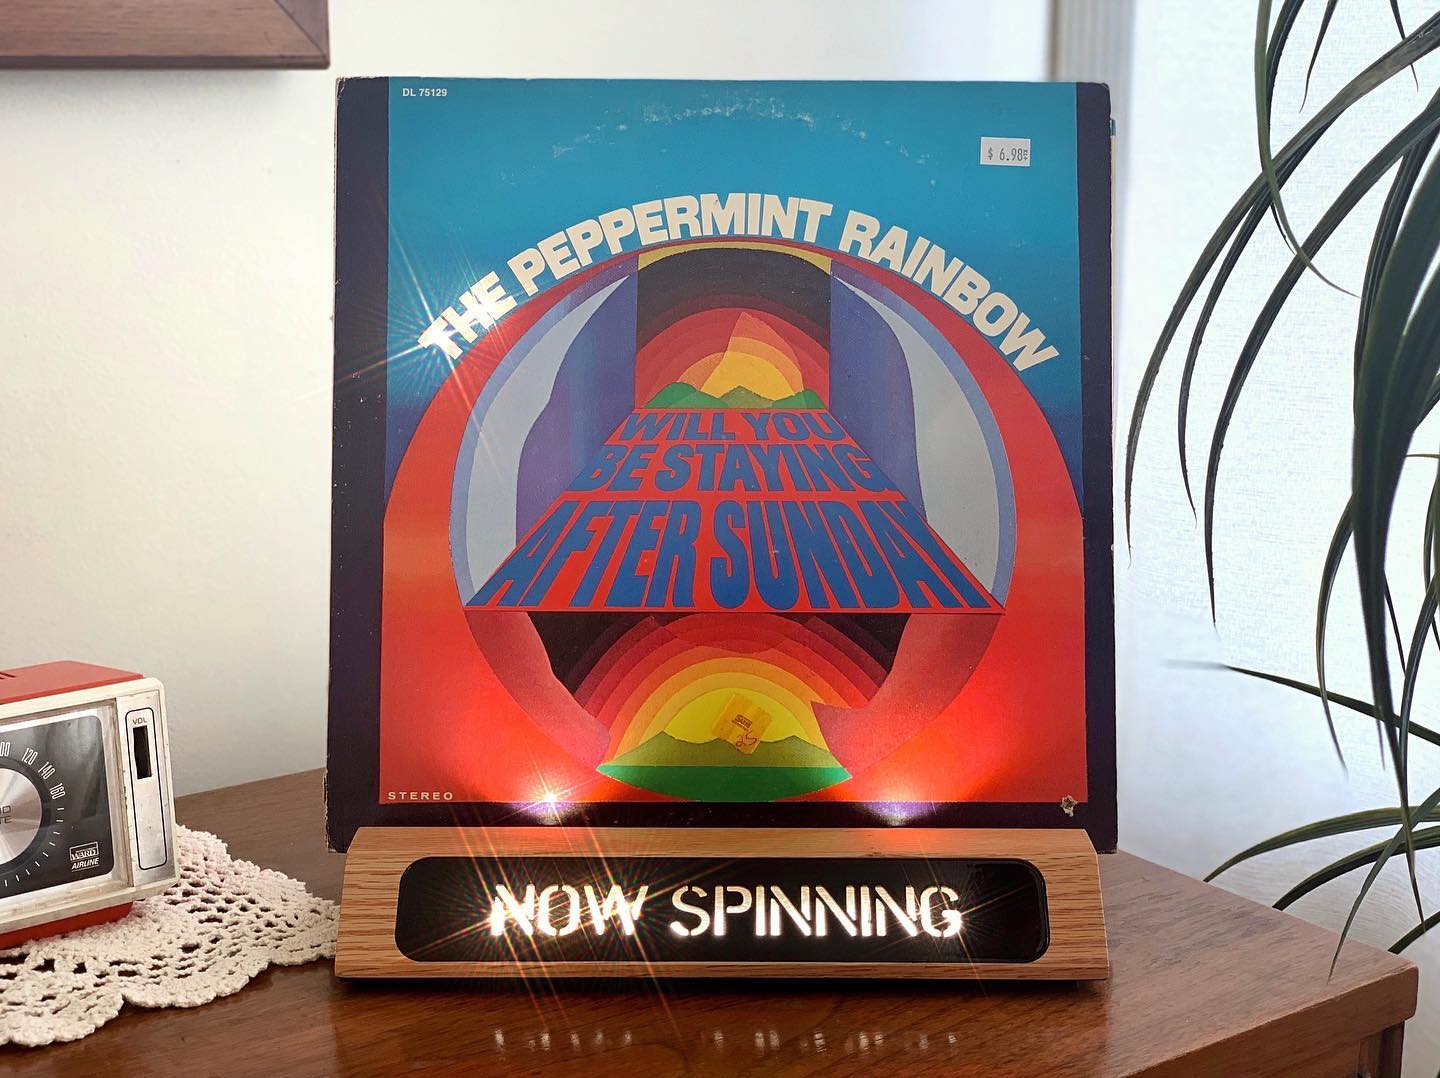 Vinyl-a-Day 30: The Peppermint Rainbow - Will You Be Staying After Sunday? (Decca, 1969)